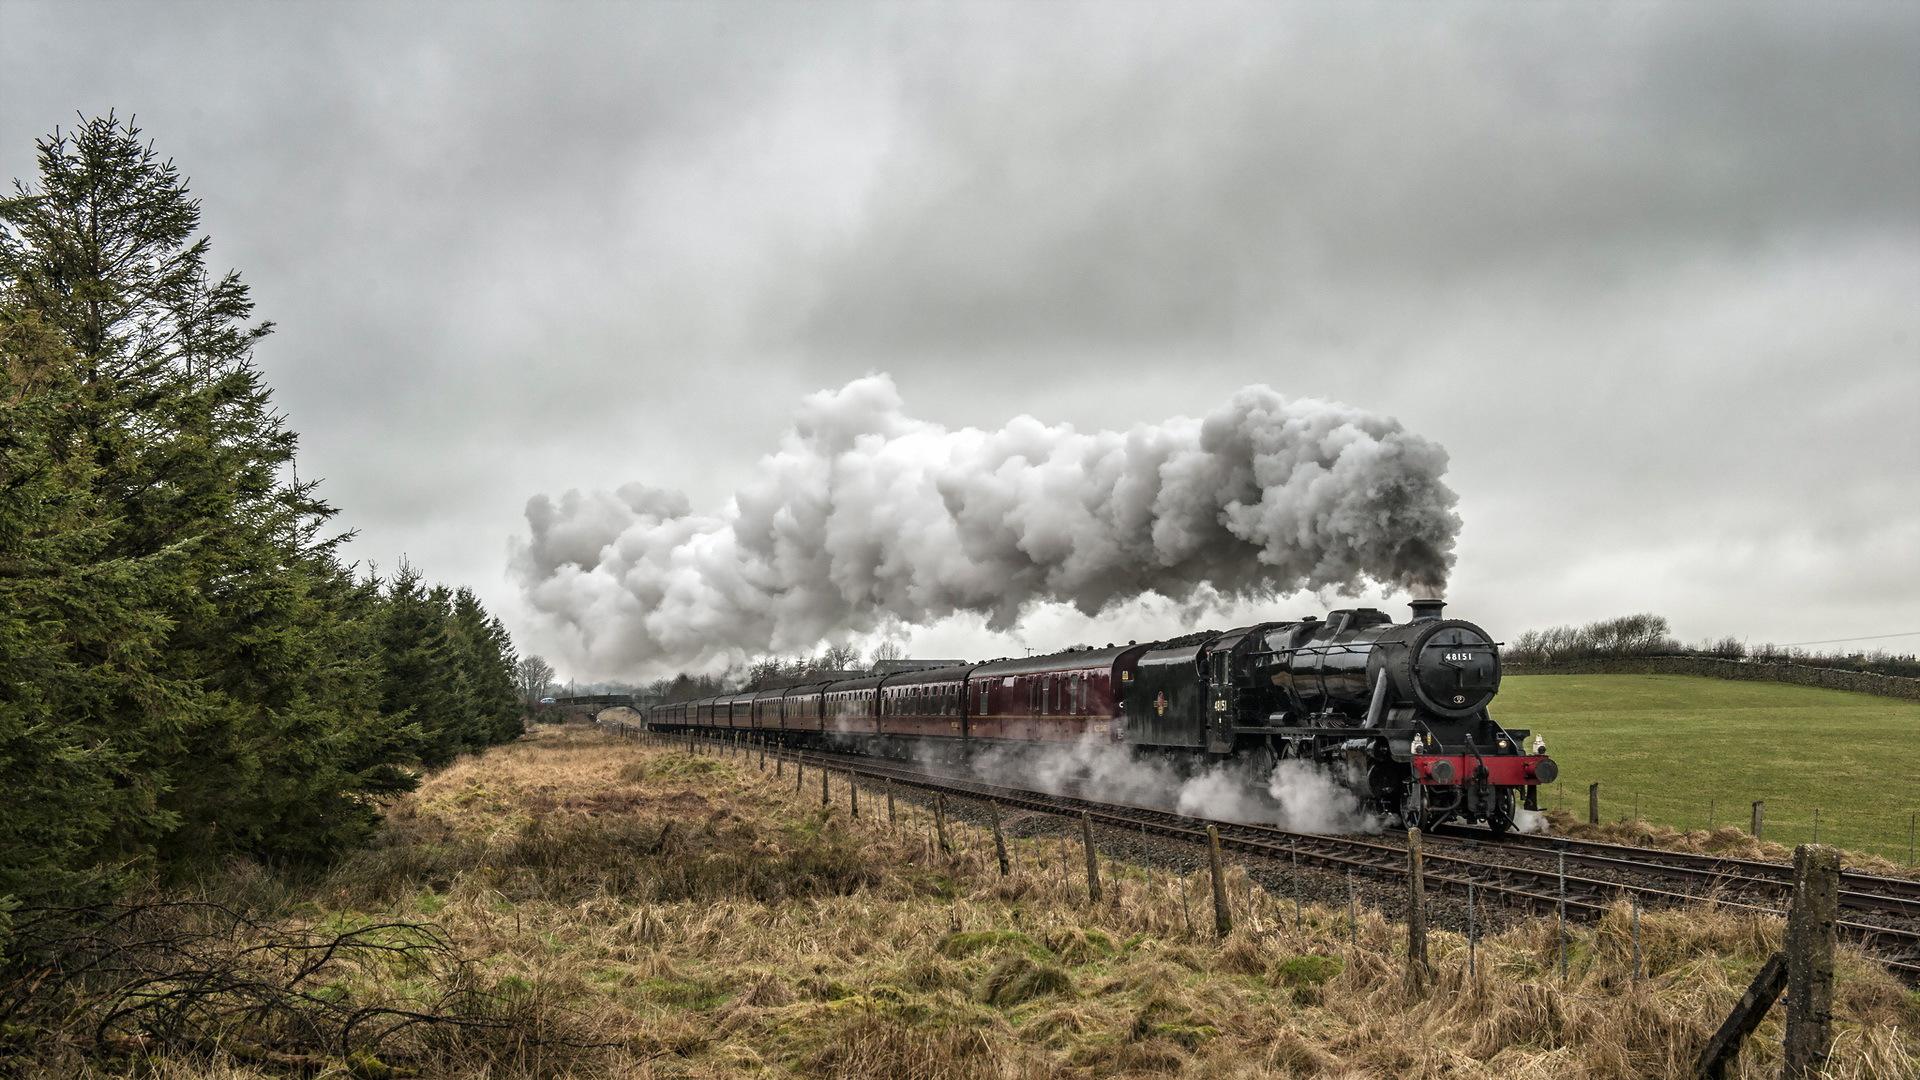 Gorgeous steam train rolling through the countryside - (#103103 ...